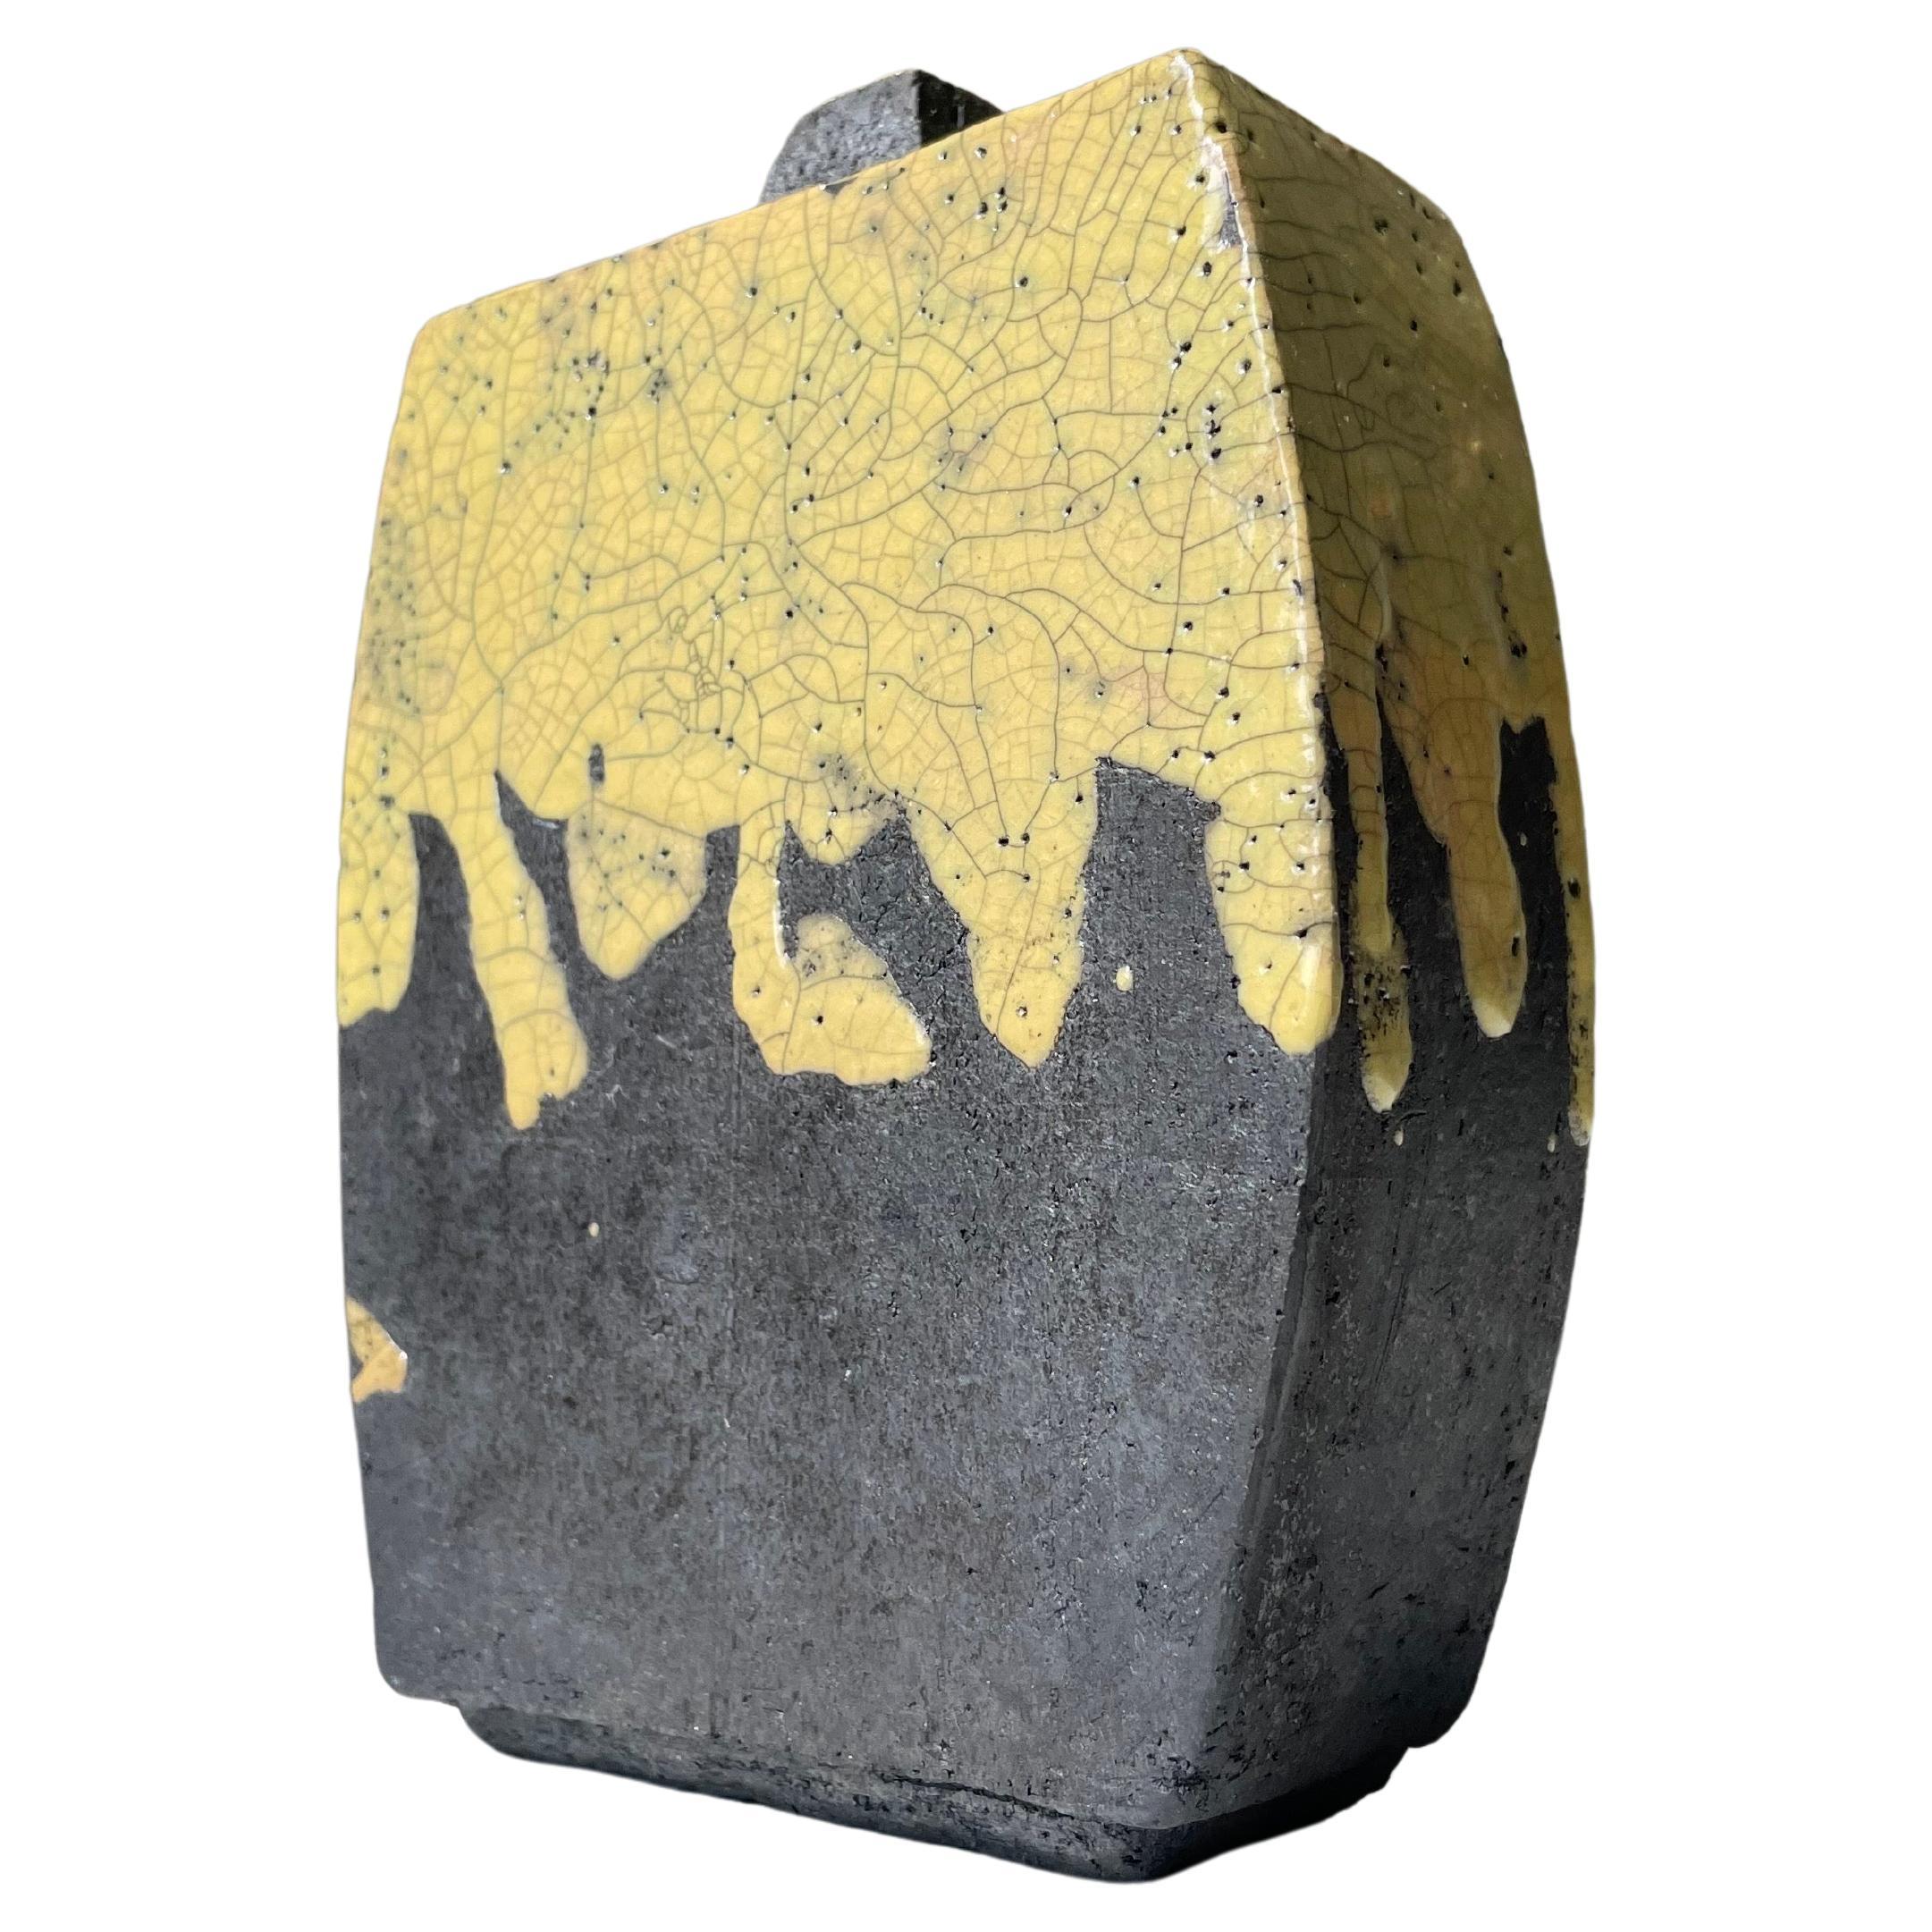 Scandinavian modern Japanese inspired rustic raku ceramic decorative vase. Running yellow crackle glaze over anthracite raw clay. A combination of rounded shapes and straight lines with a short square shaped top partially glazed. Signed under base.